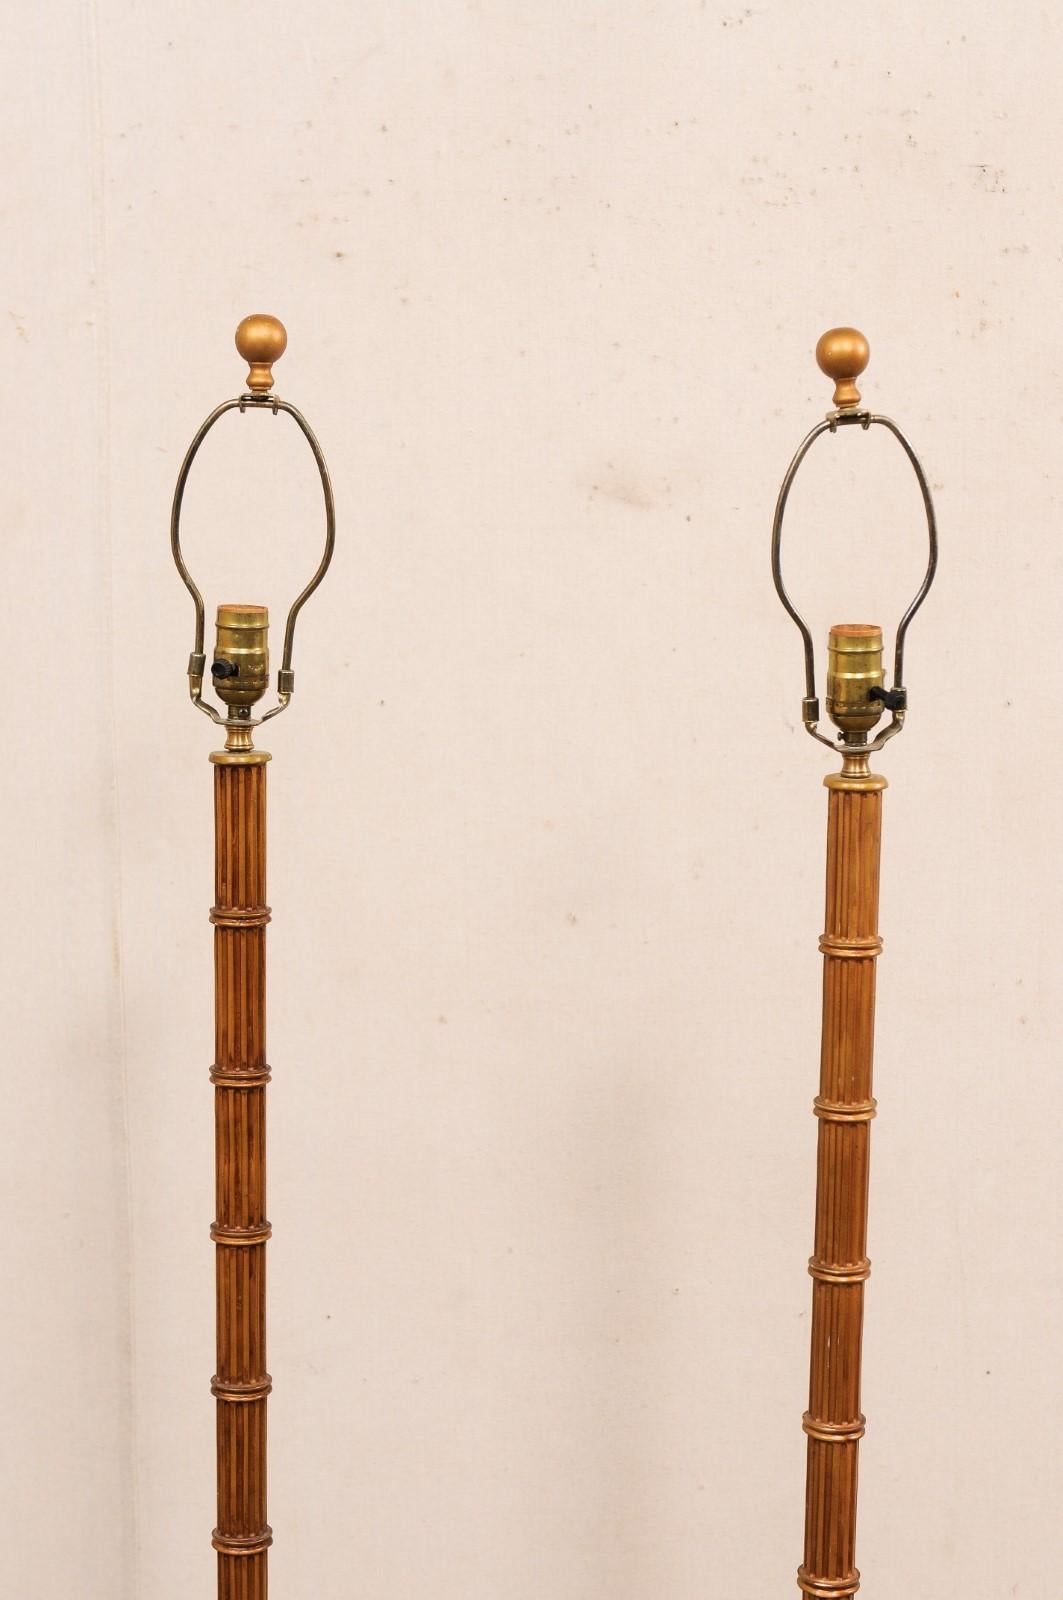 A Brass Pair of Chapman Bamboo Style Floor Lamps, Rewired for US In Good Condition For Sale In Atlanta, GA